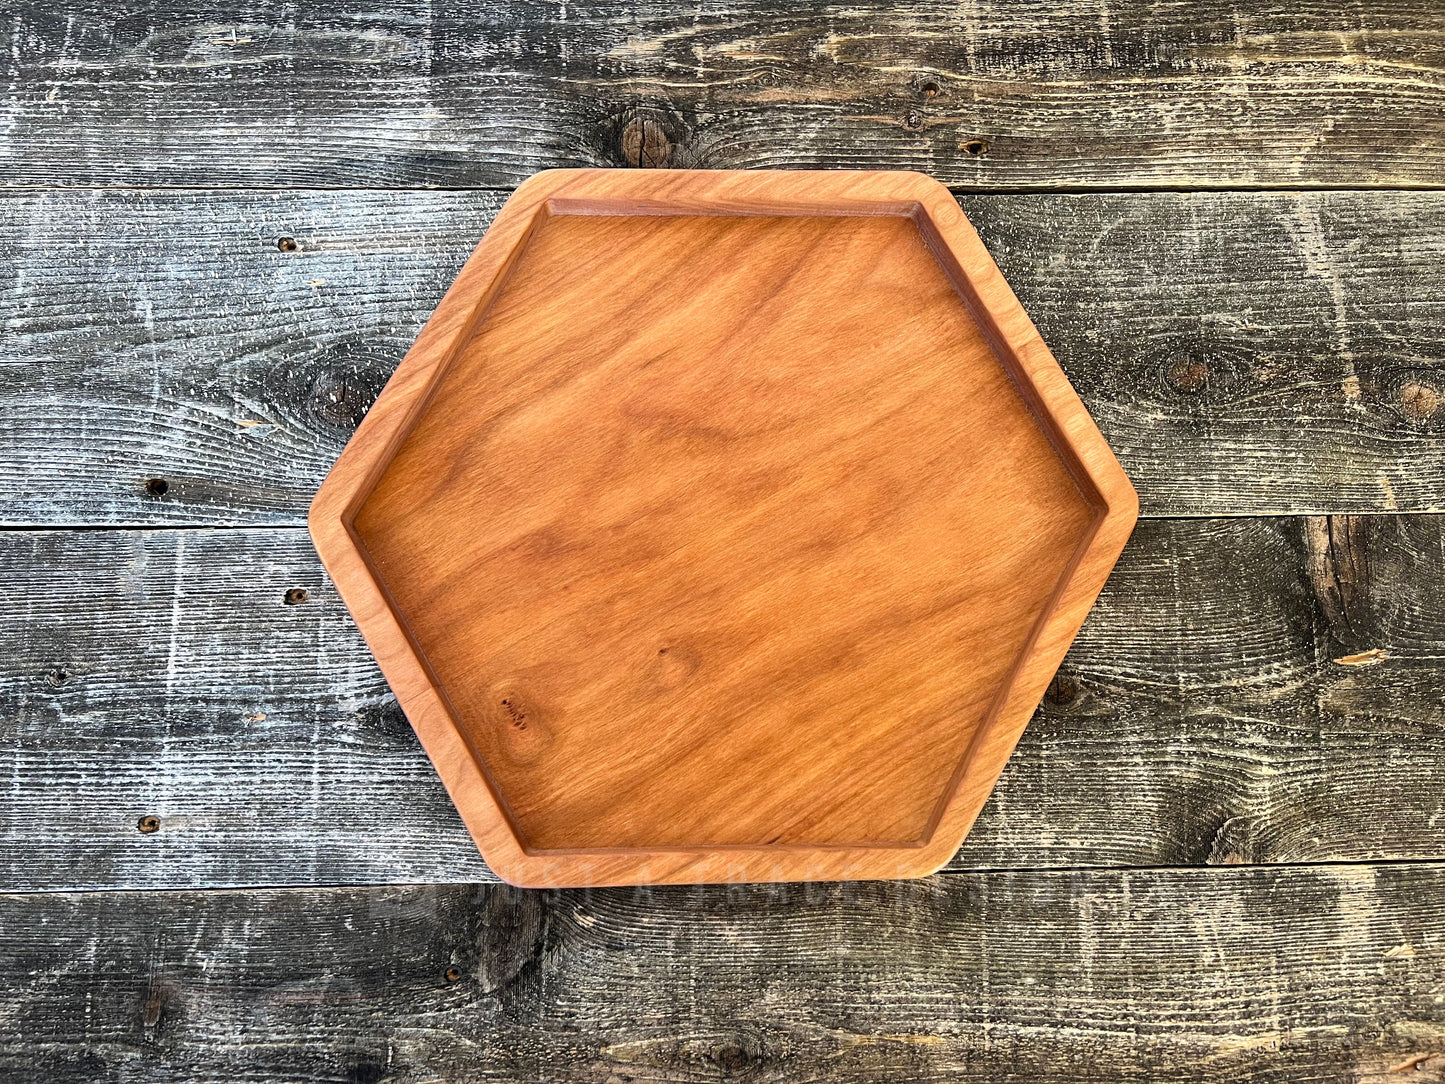 12" Hexagon Cherry Tray, Charcuterie Board, Coffee Table, Ottoman Tray, Wood Platter, Serving Tray, Wedding Gift